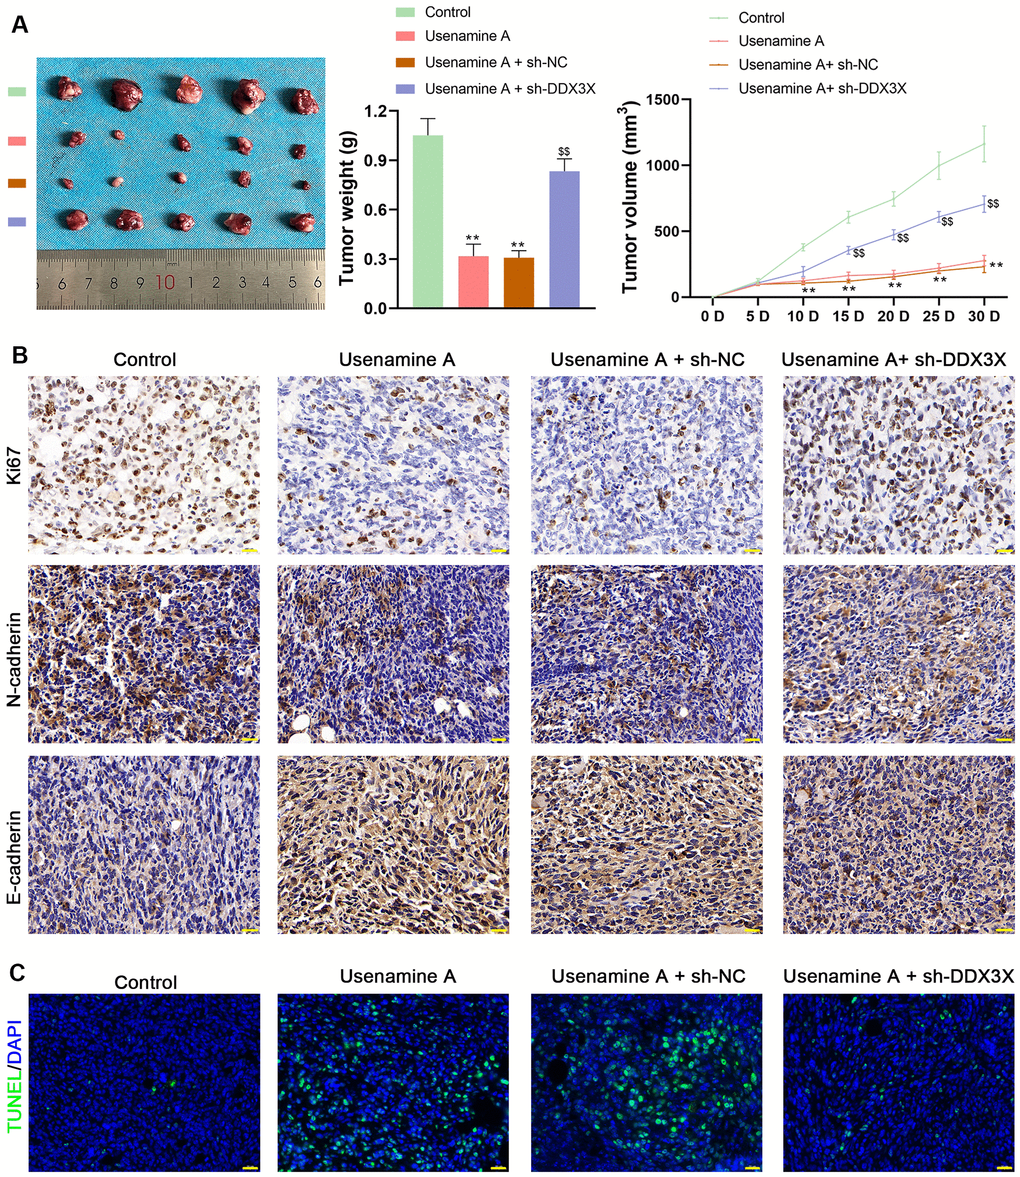 Usenamine A inhibits LUAD tumor growth by regulating DDX3X. promotes NLRP3/caspase-1/GSDMD-mediated pyroptosis by upregulating the DDX3X/SQSTM1 axis in vivo. (A) Tumor weight and volume. **p . control; $$p . usenamine A + sh-DDX3X. (B) Protein expression of Ki67, N-cadherin, and E-cadherin in tumor tissues was measured by immunohistochemical staining. Scale bar = 20 μm. (C) Apoptosis in tissues was detected by TUNEL staining. Scale bar = 20 μm. LUAD, lung adenocarcinoma; DDX3X, DEAD-Box helicase 3 X-Linked.